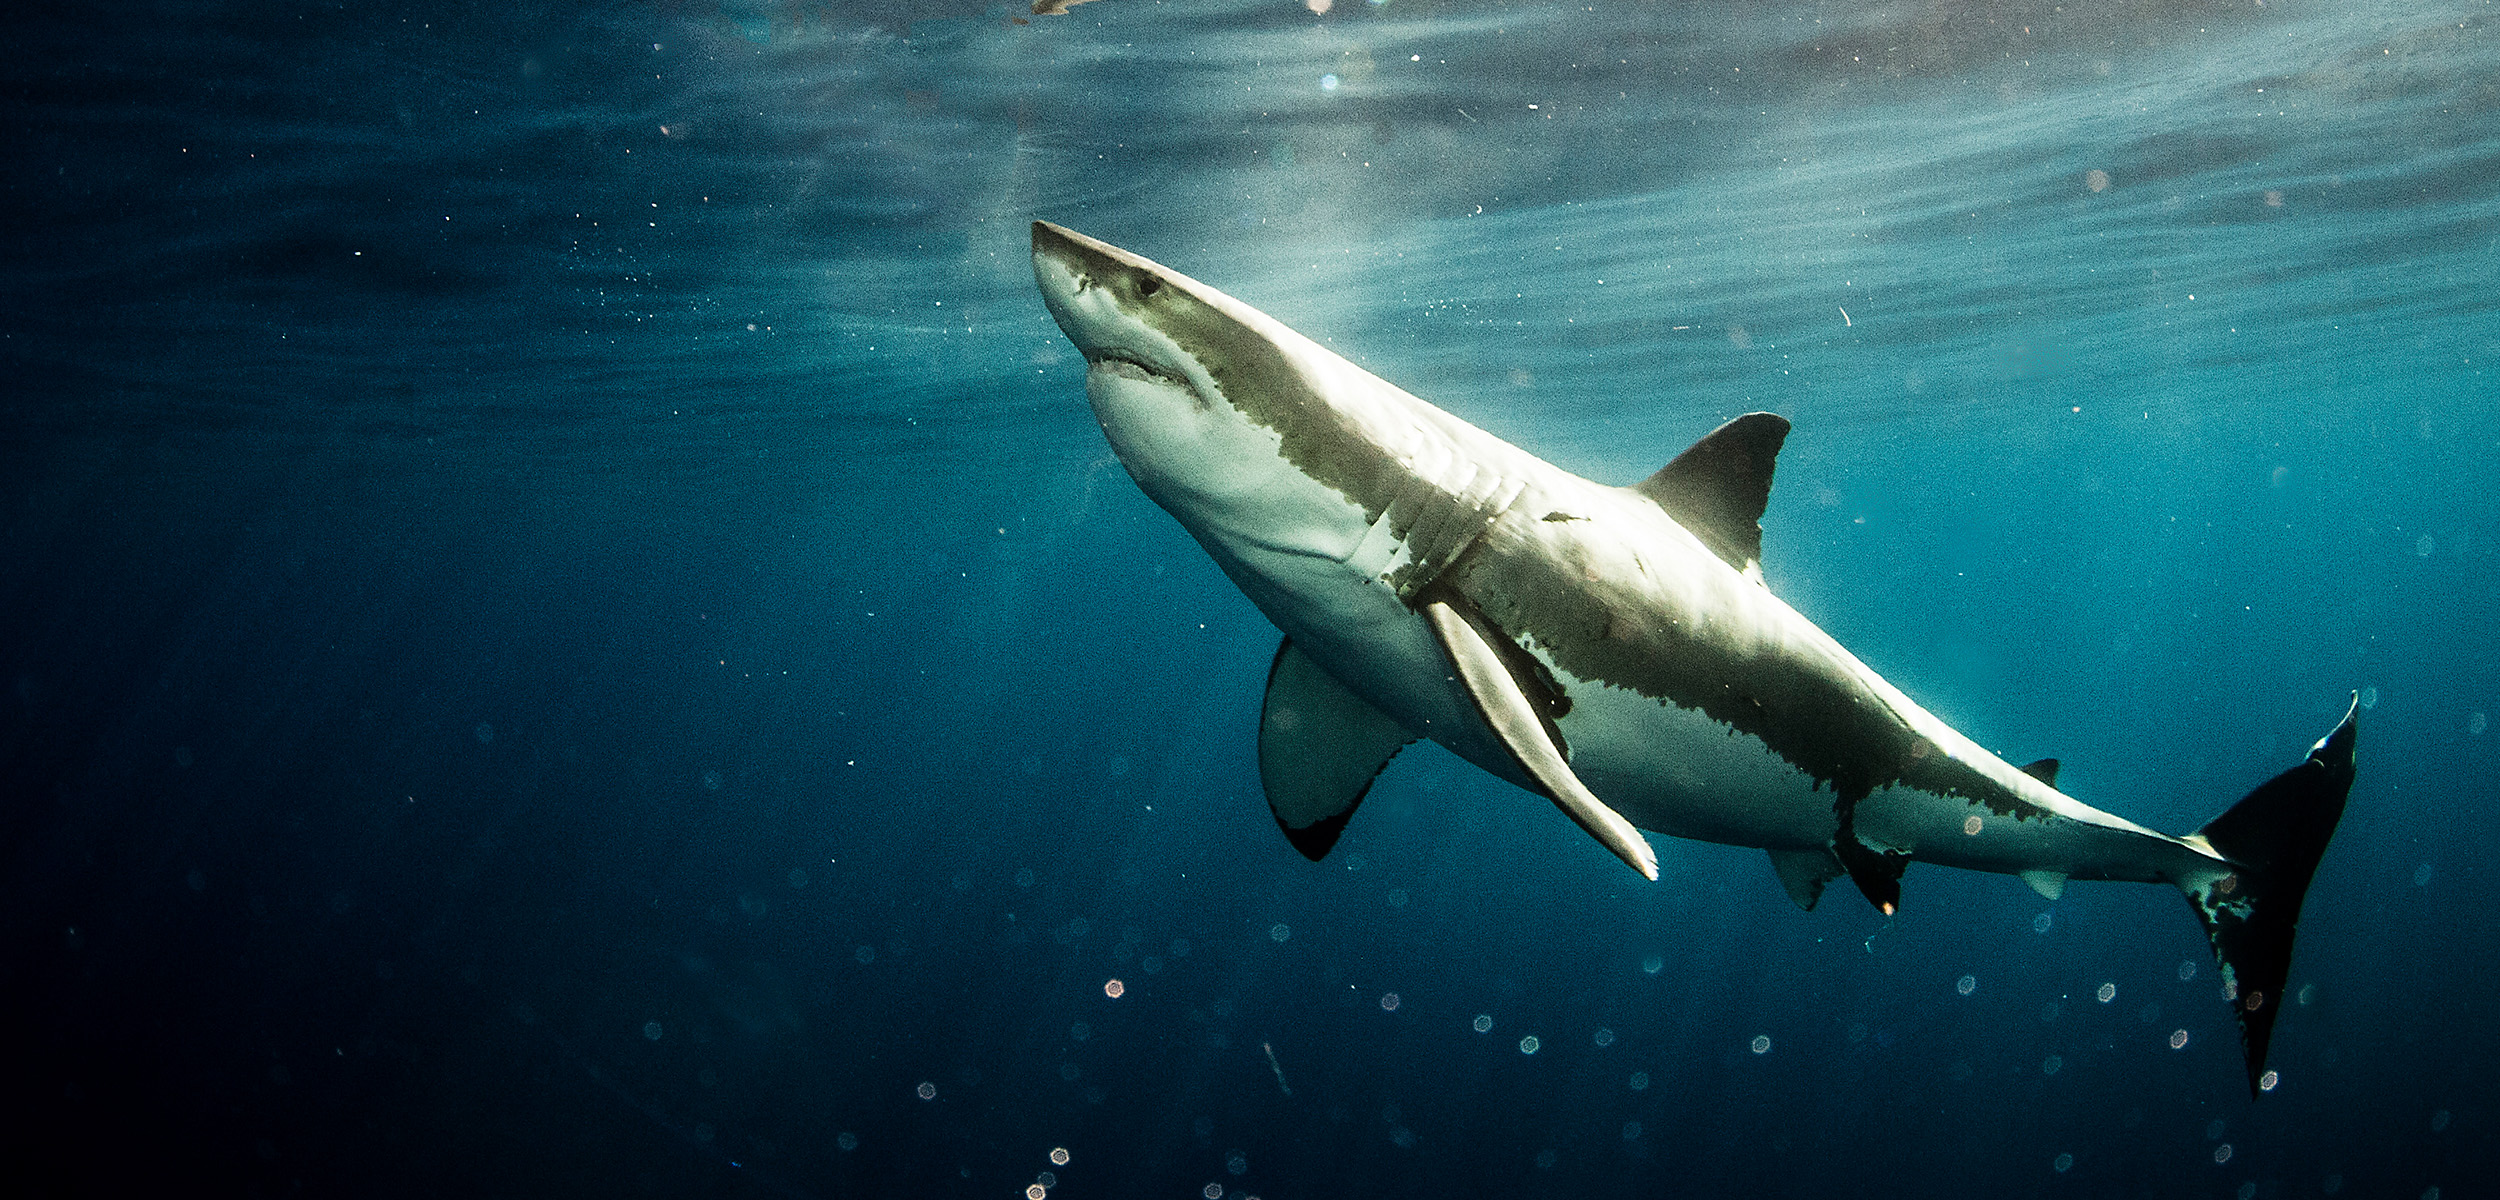 South Africa's Missing Sharks Have Been Found